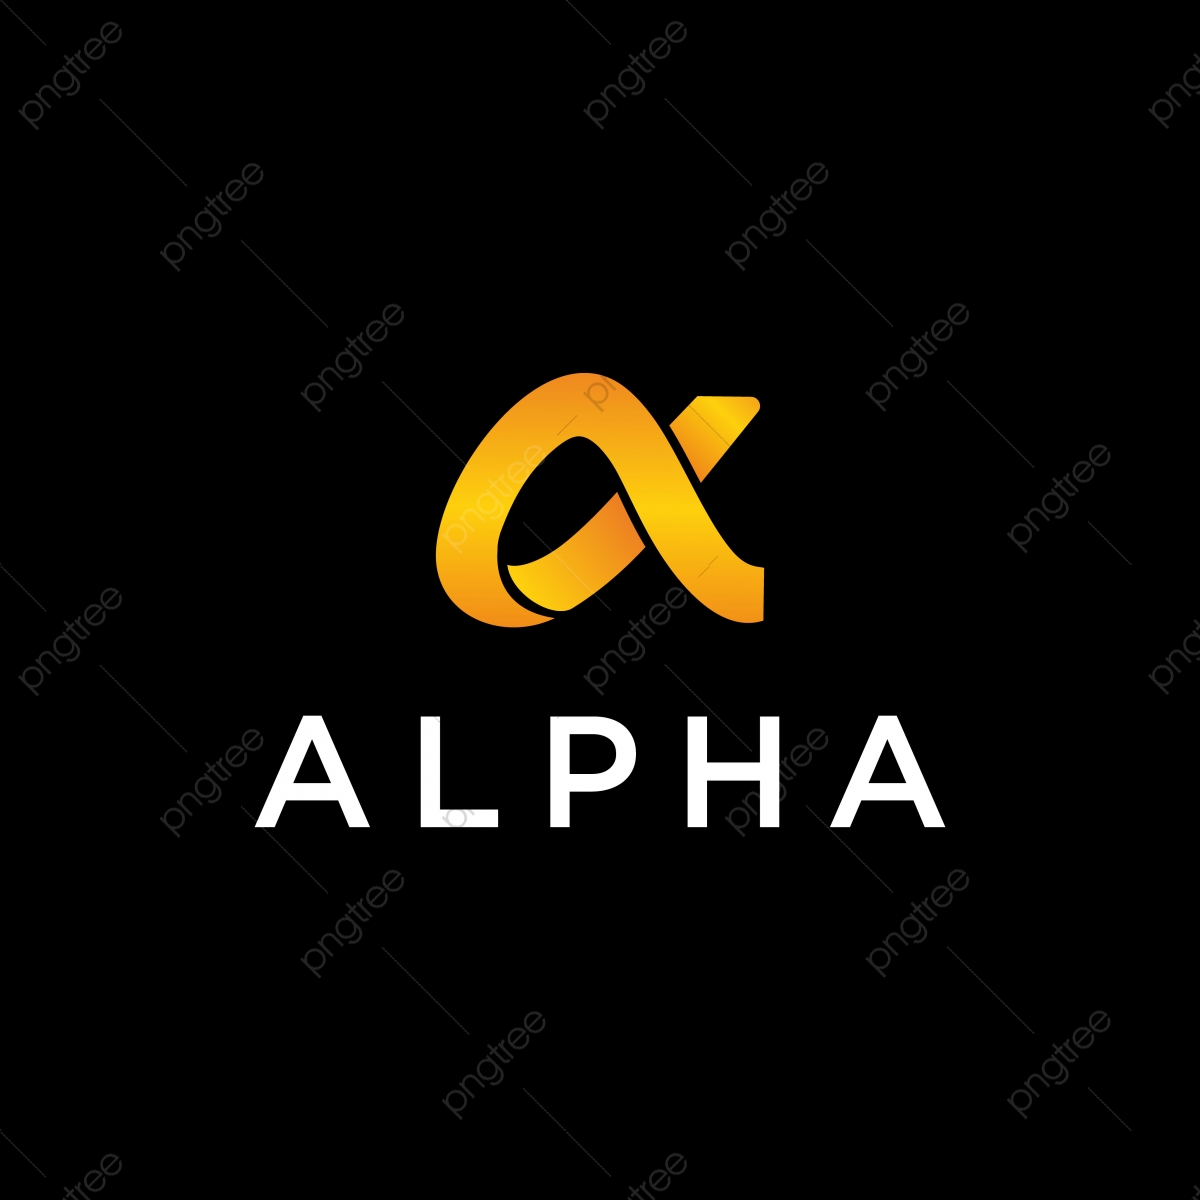 How To Make Fast Money Daily With Go-alpha